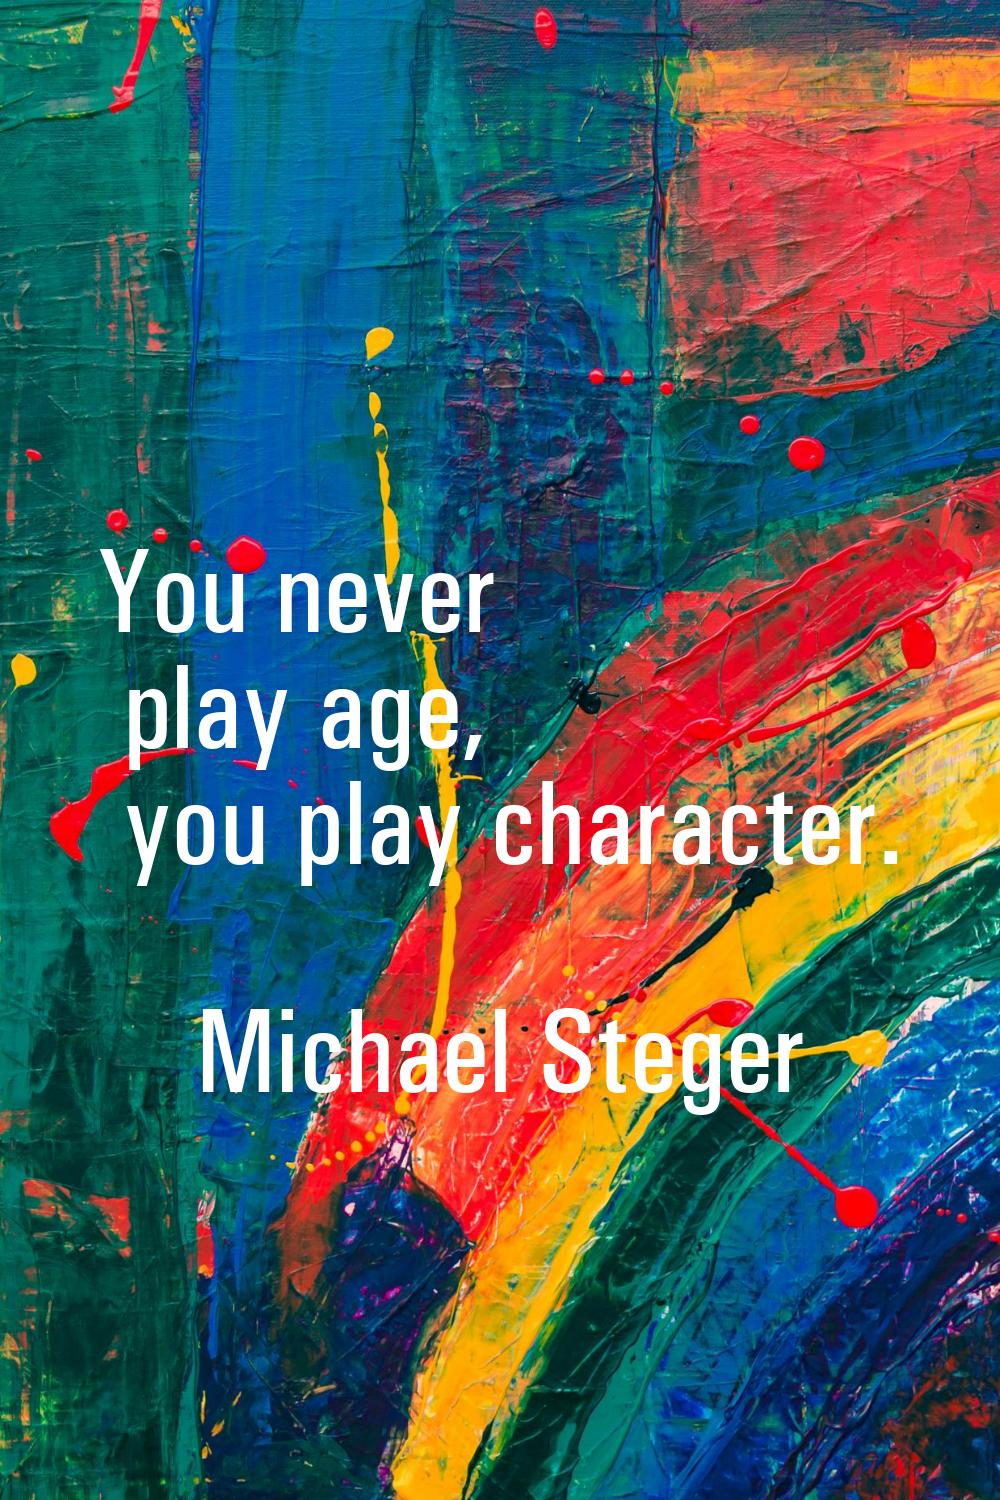 You never play age, you play character.